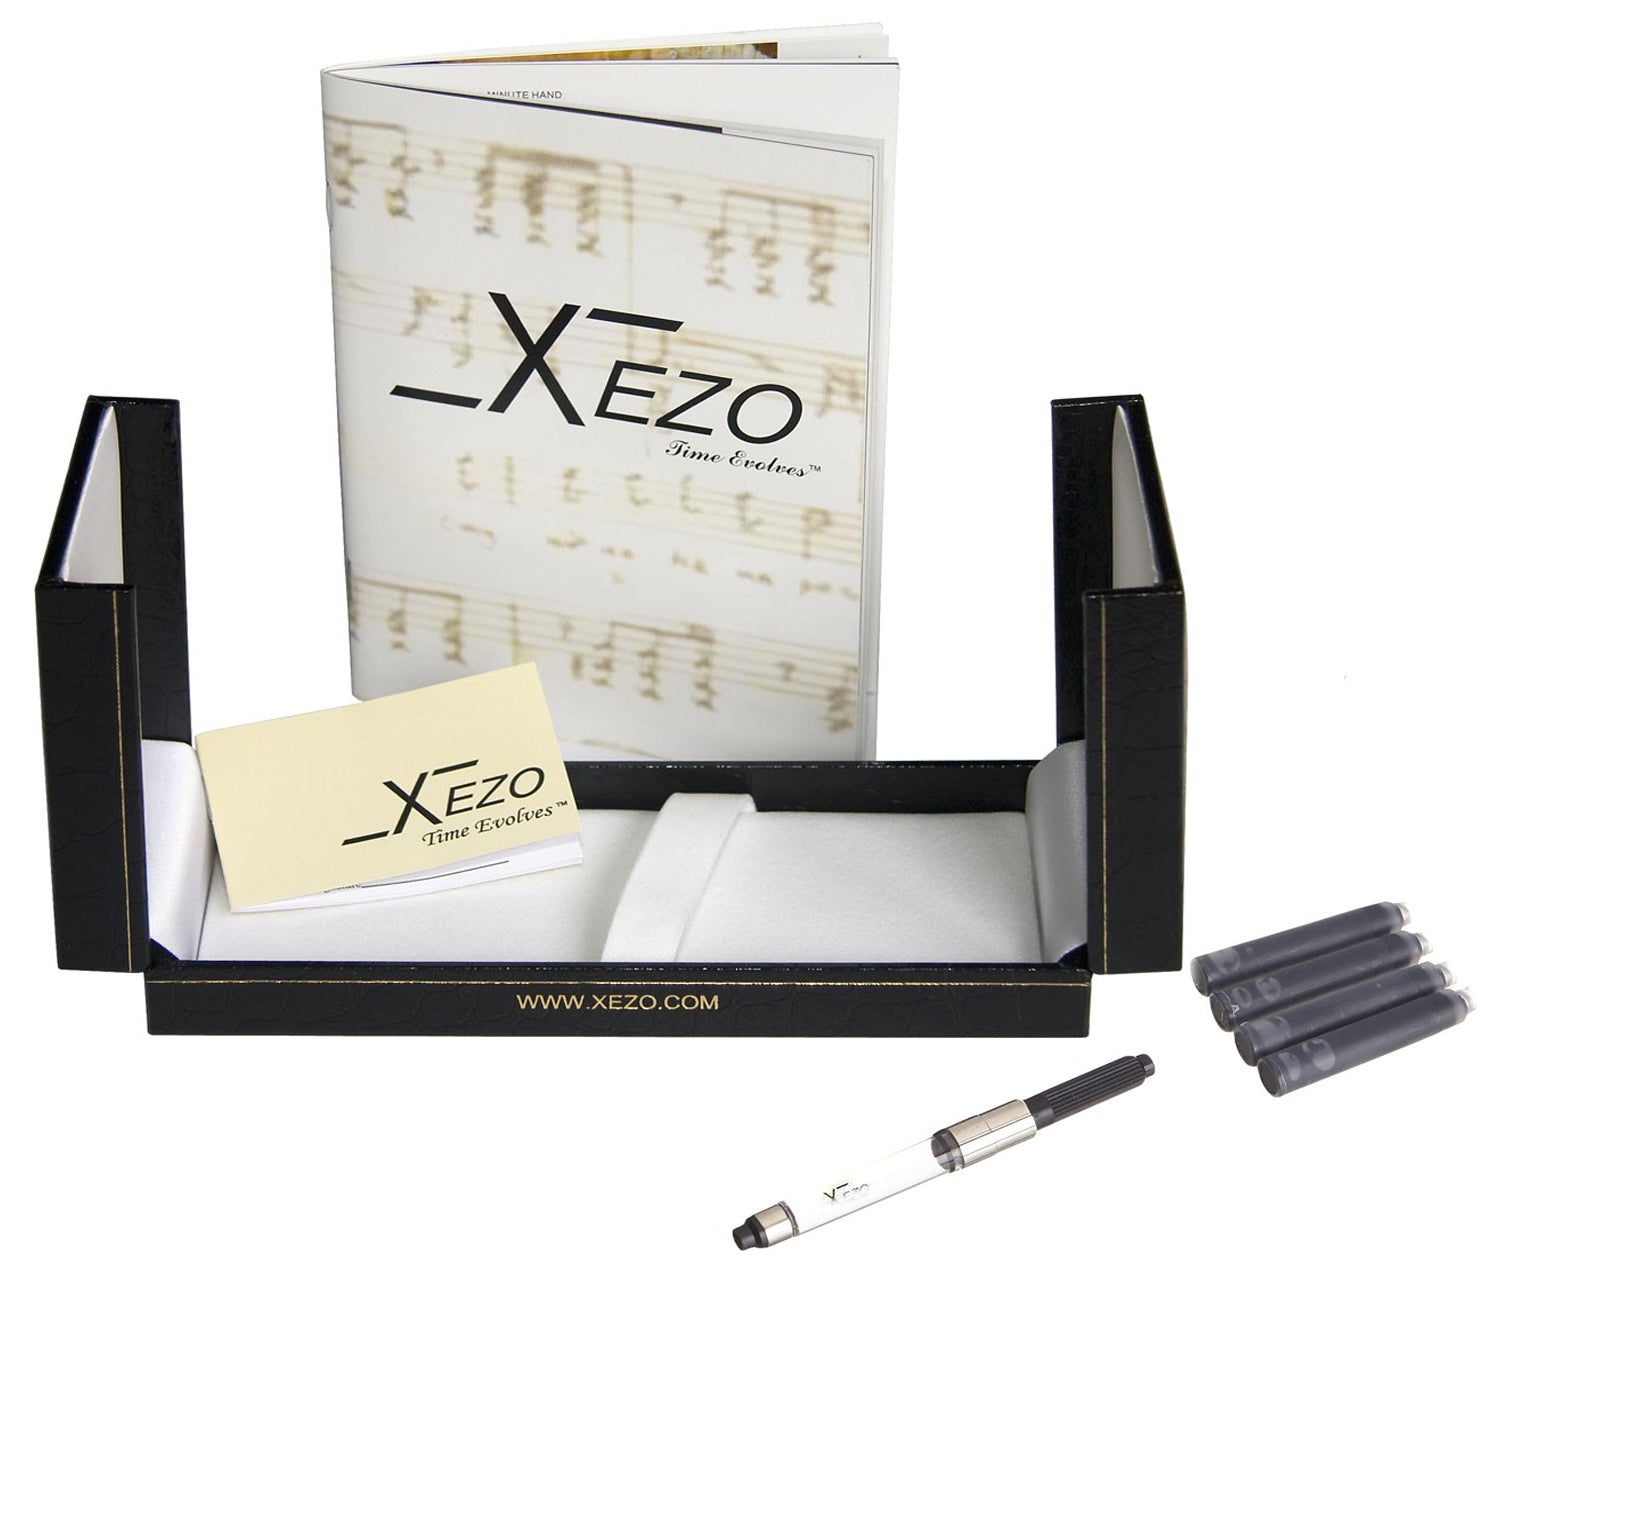 Xezo - Black clamshell gift box, certificate, manual, ink converter, and four ink cartridges